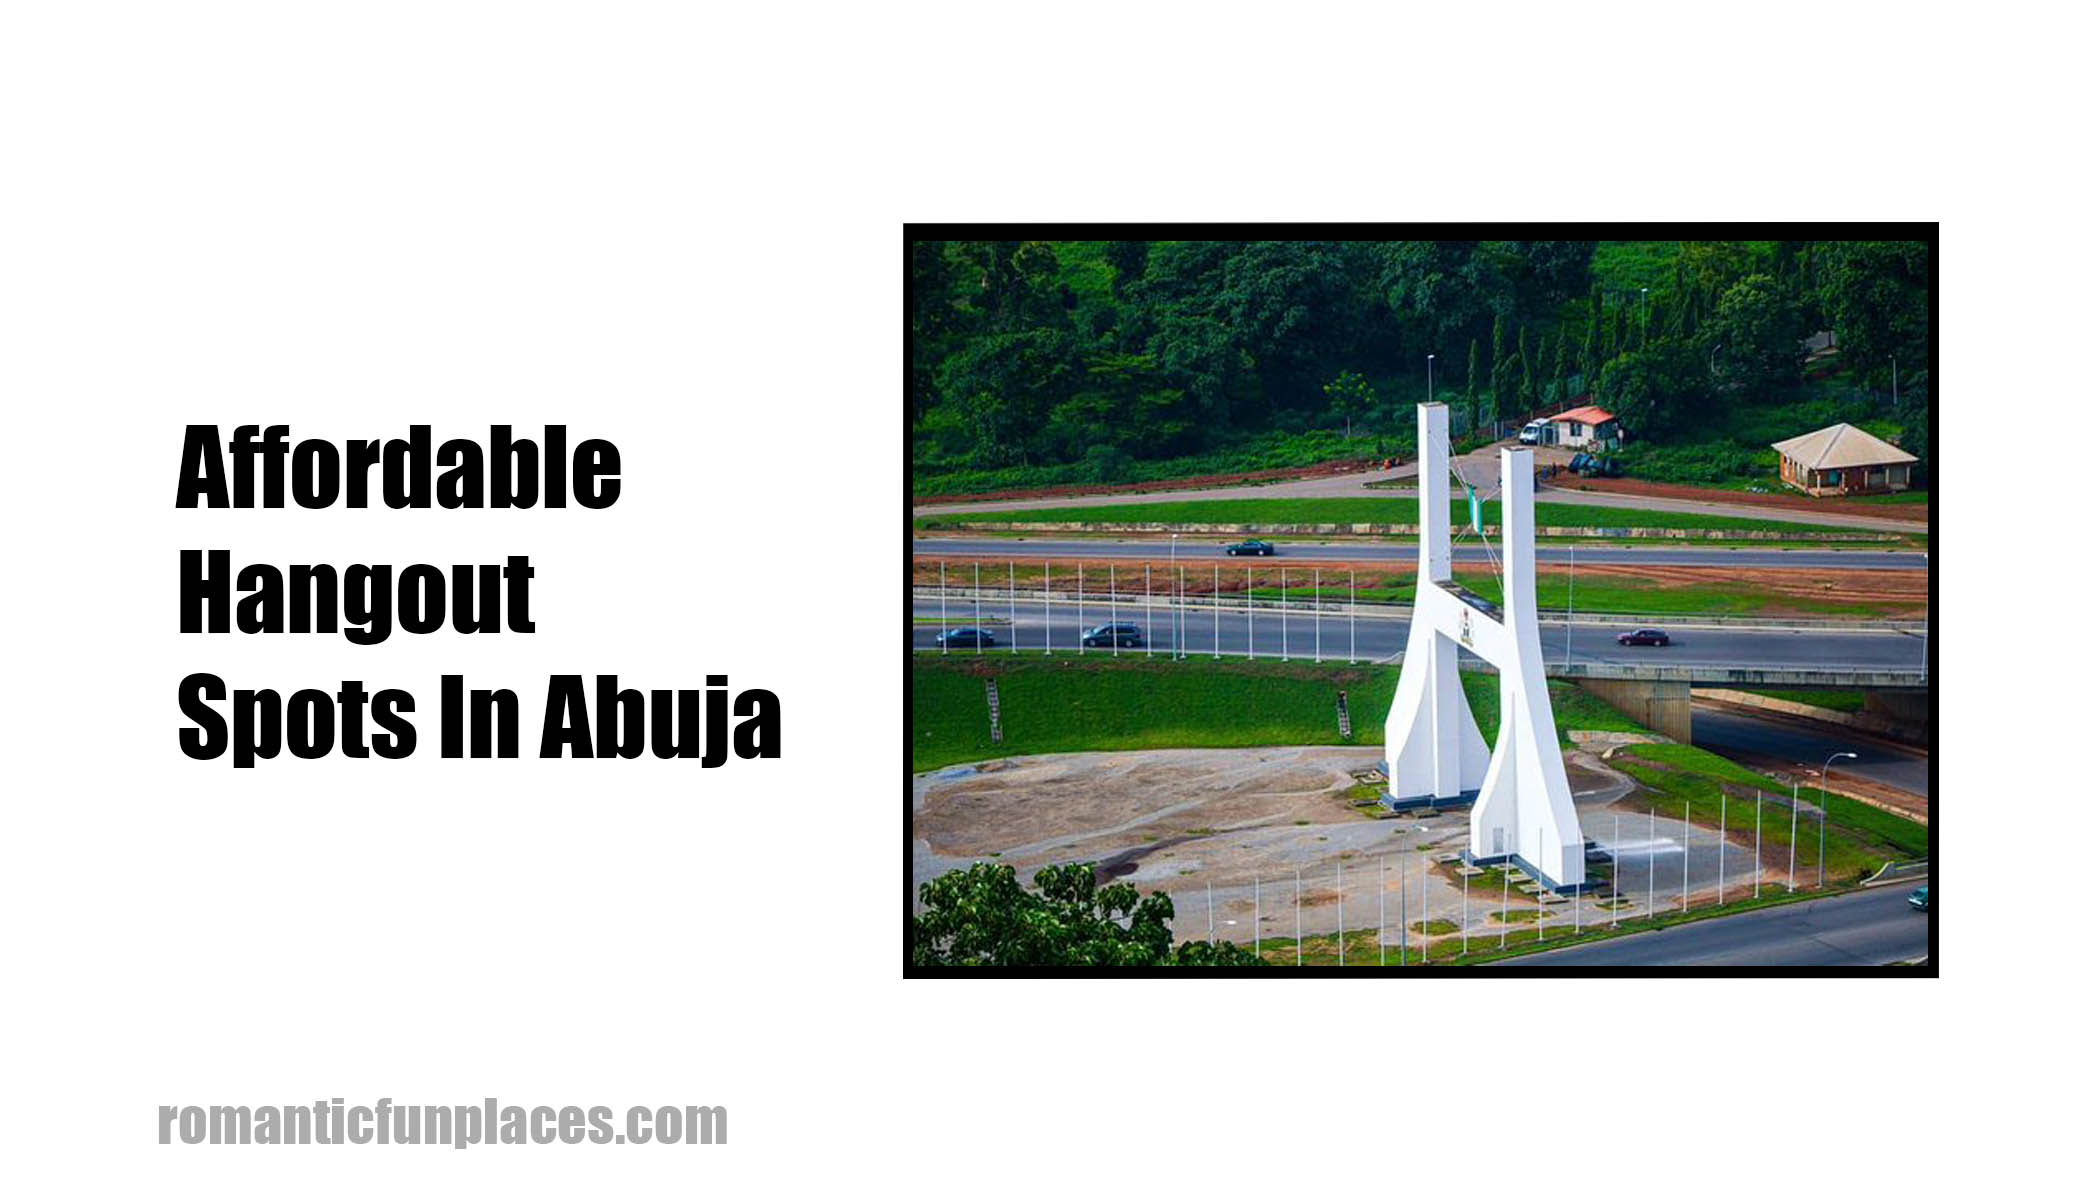 Affordable Hangout Spots In Abuja